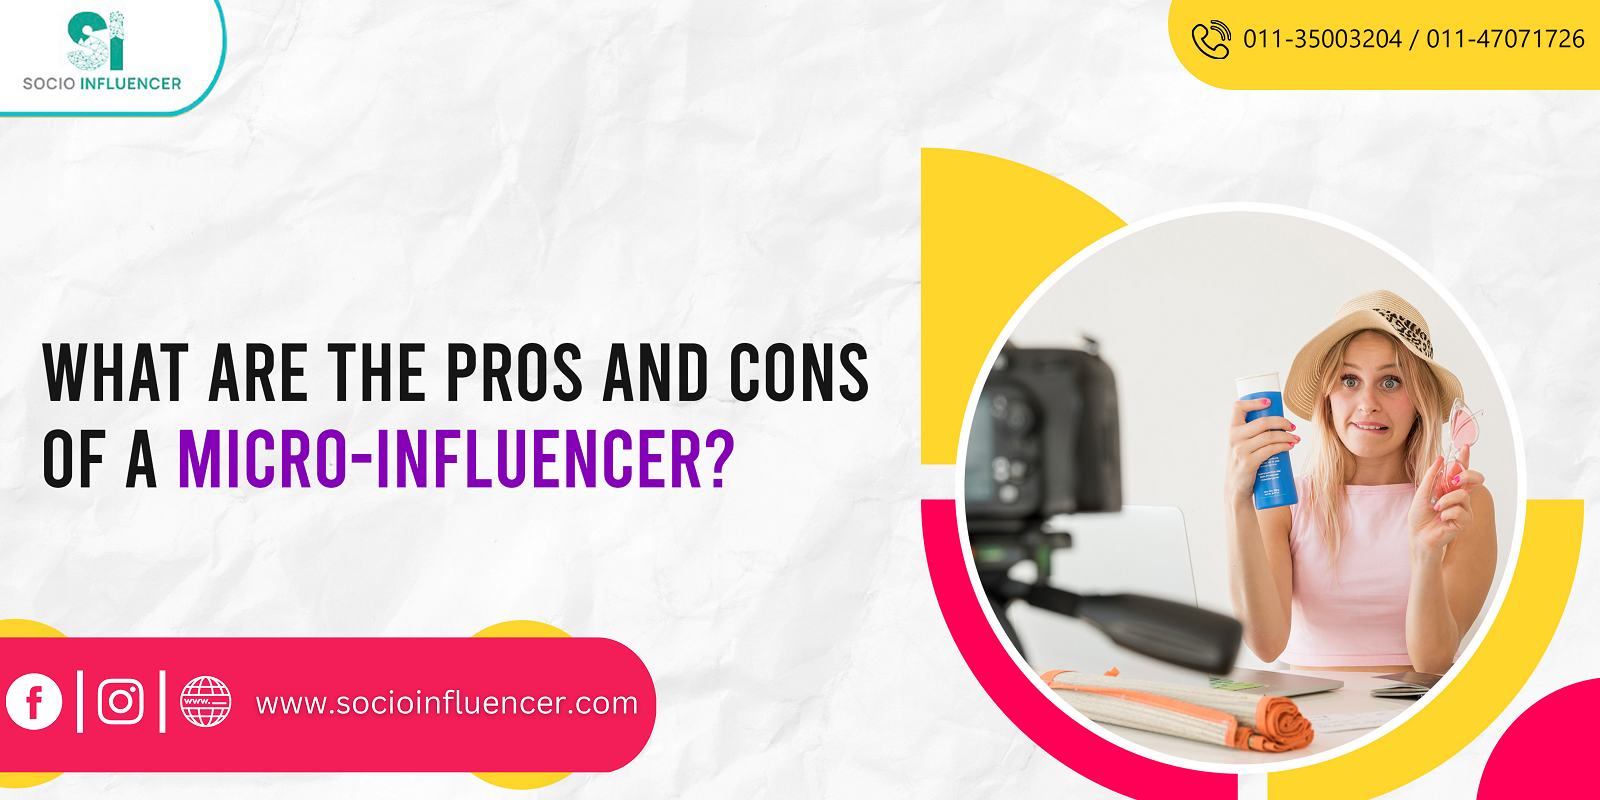 Working with Micro-Influencers: Pros and Cons